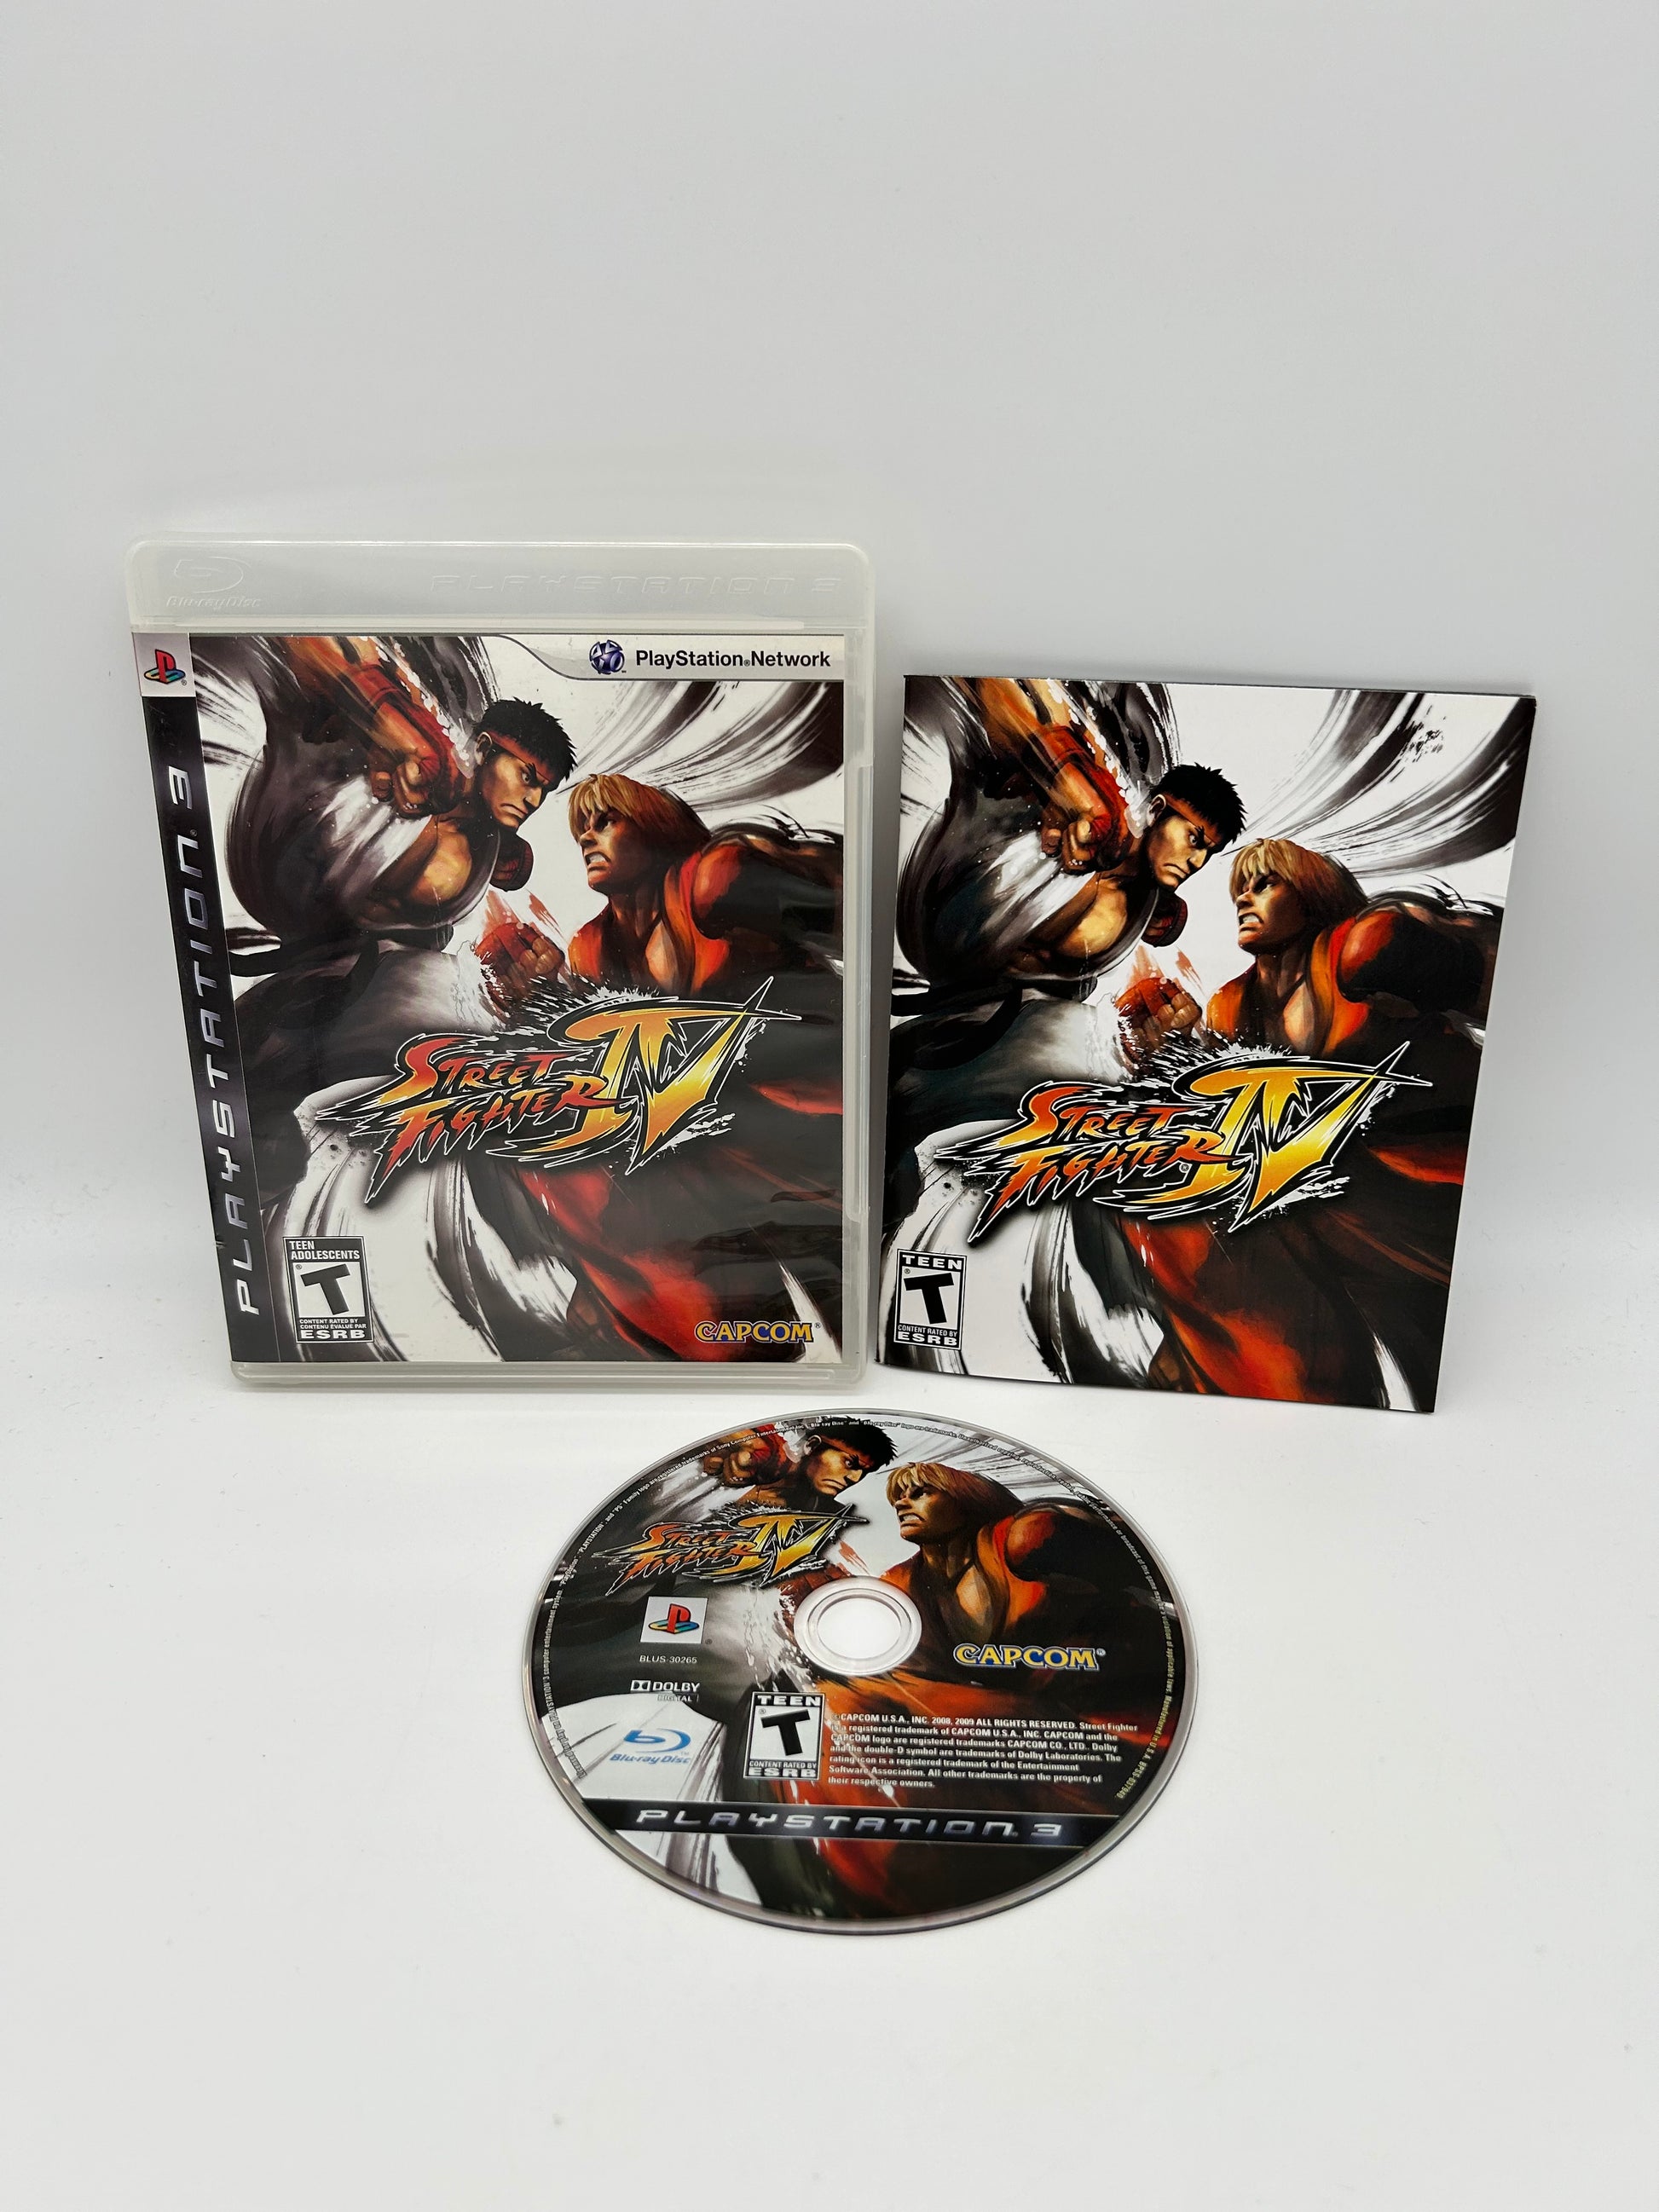 PiXEL-RETRO.COM : SONY PLAYSTATION 3 PS3 COMPLETE GAME BOX MANUAL NTSC STREET FIGHTER IV